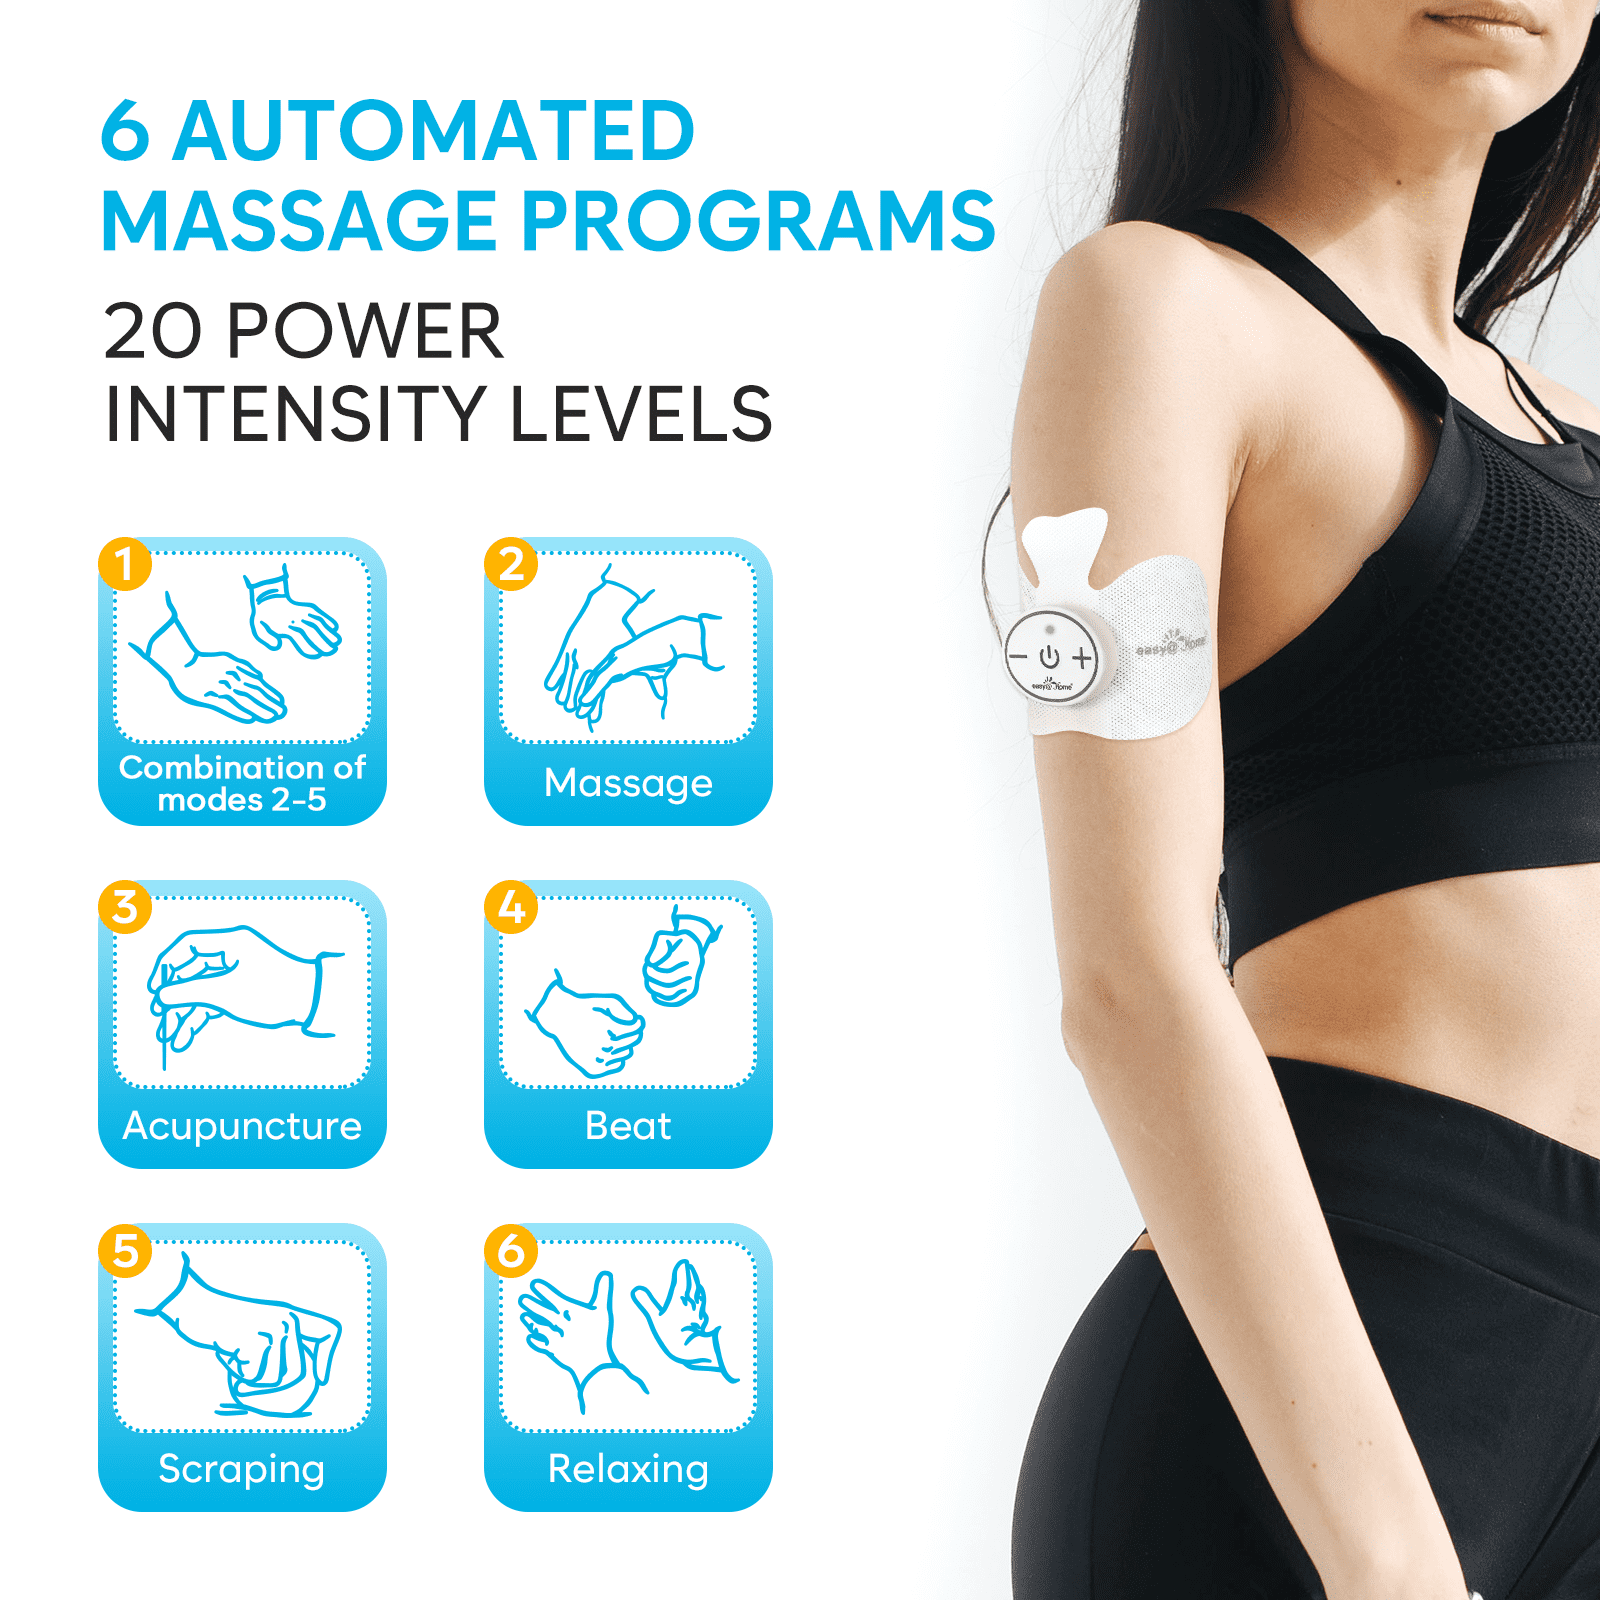 PokeTens Wireless TENS Unit Muscle Stimulator for Pain Relief